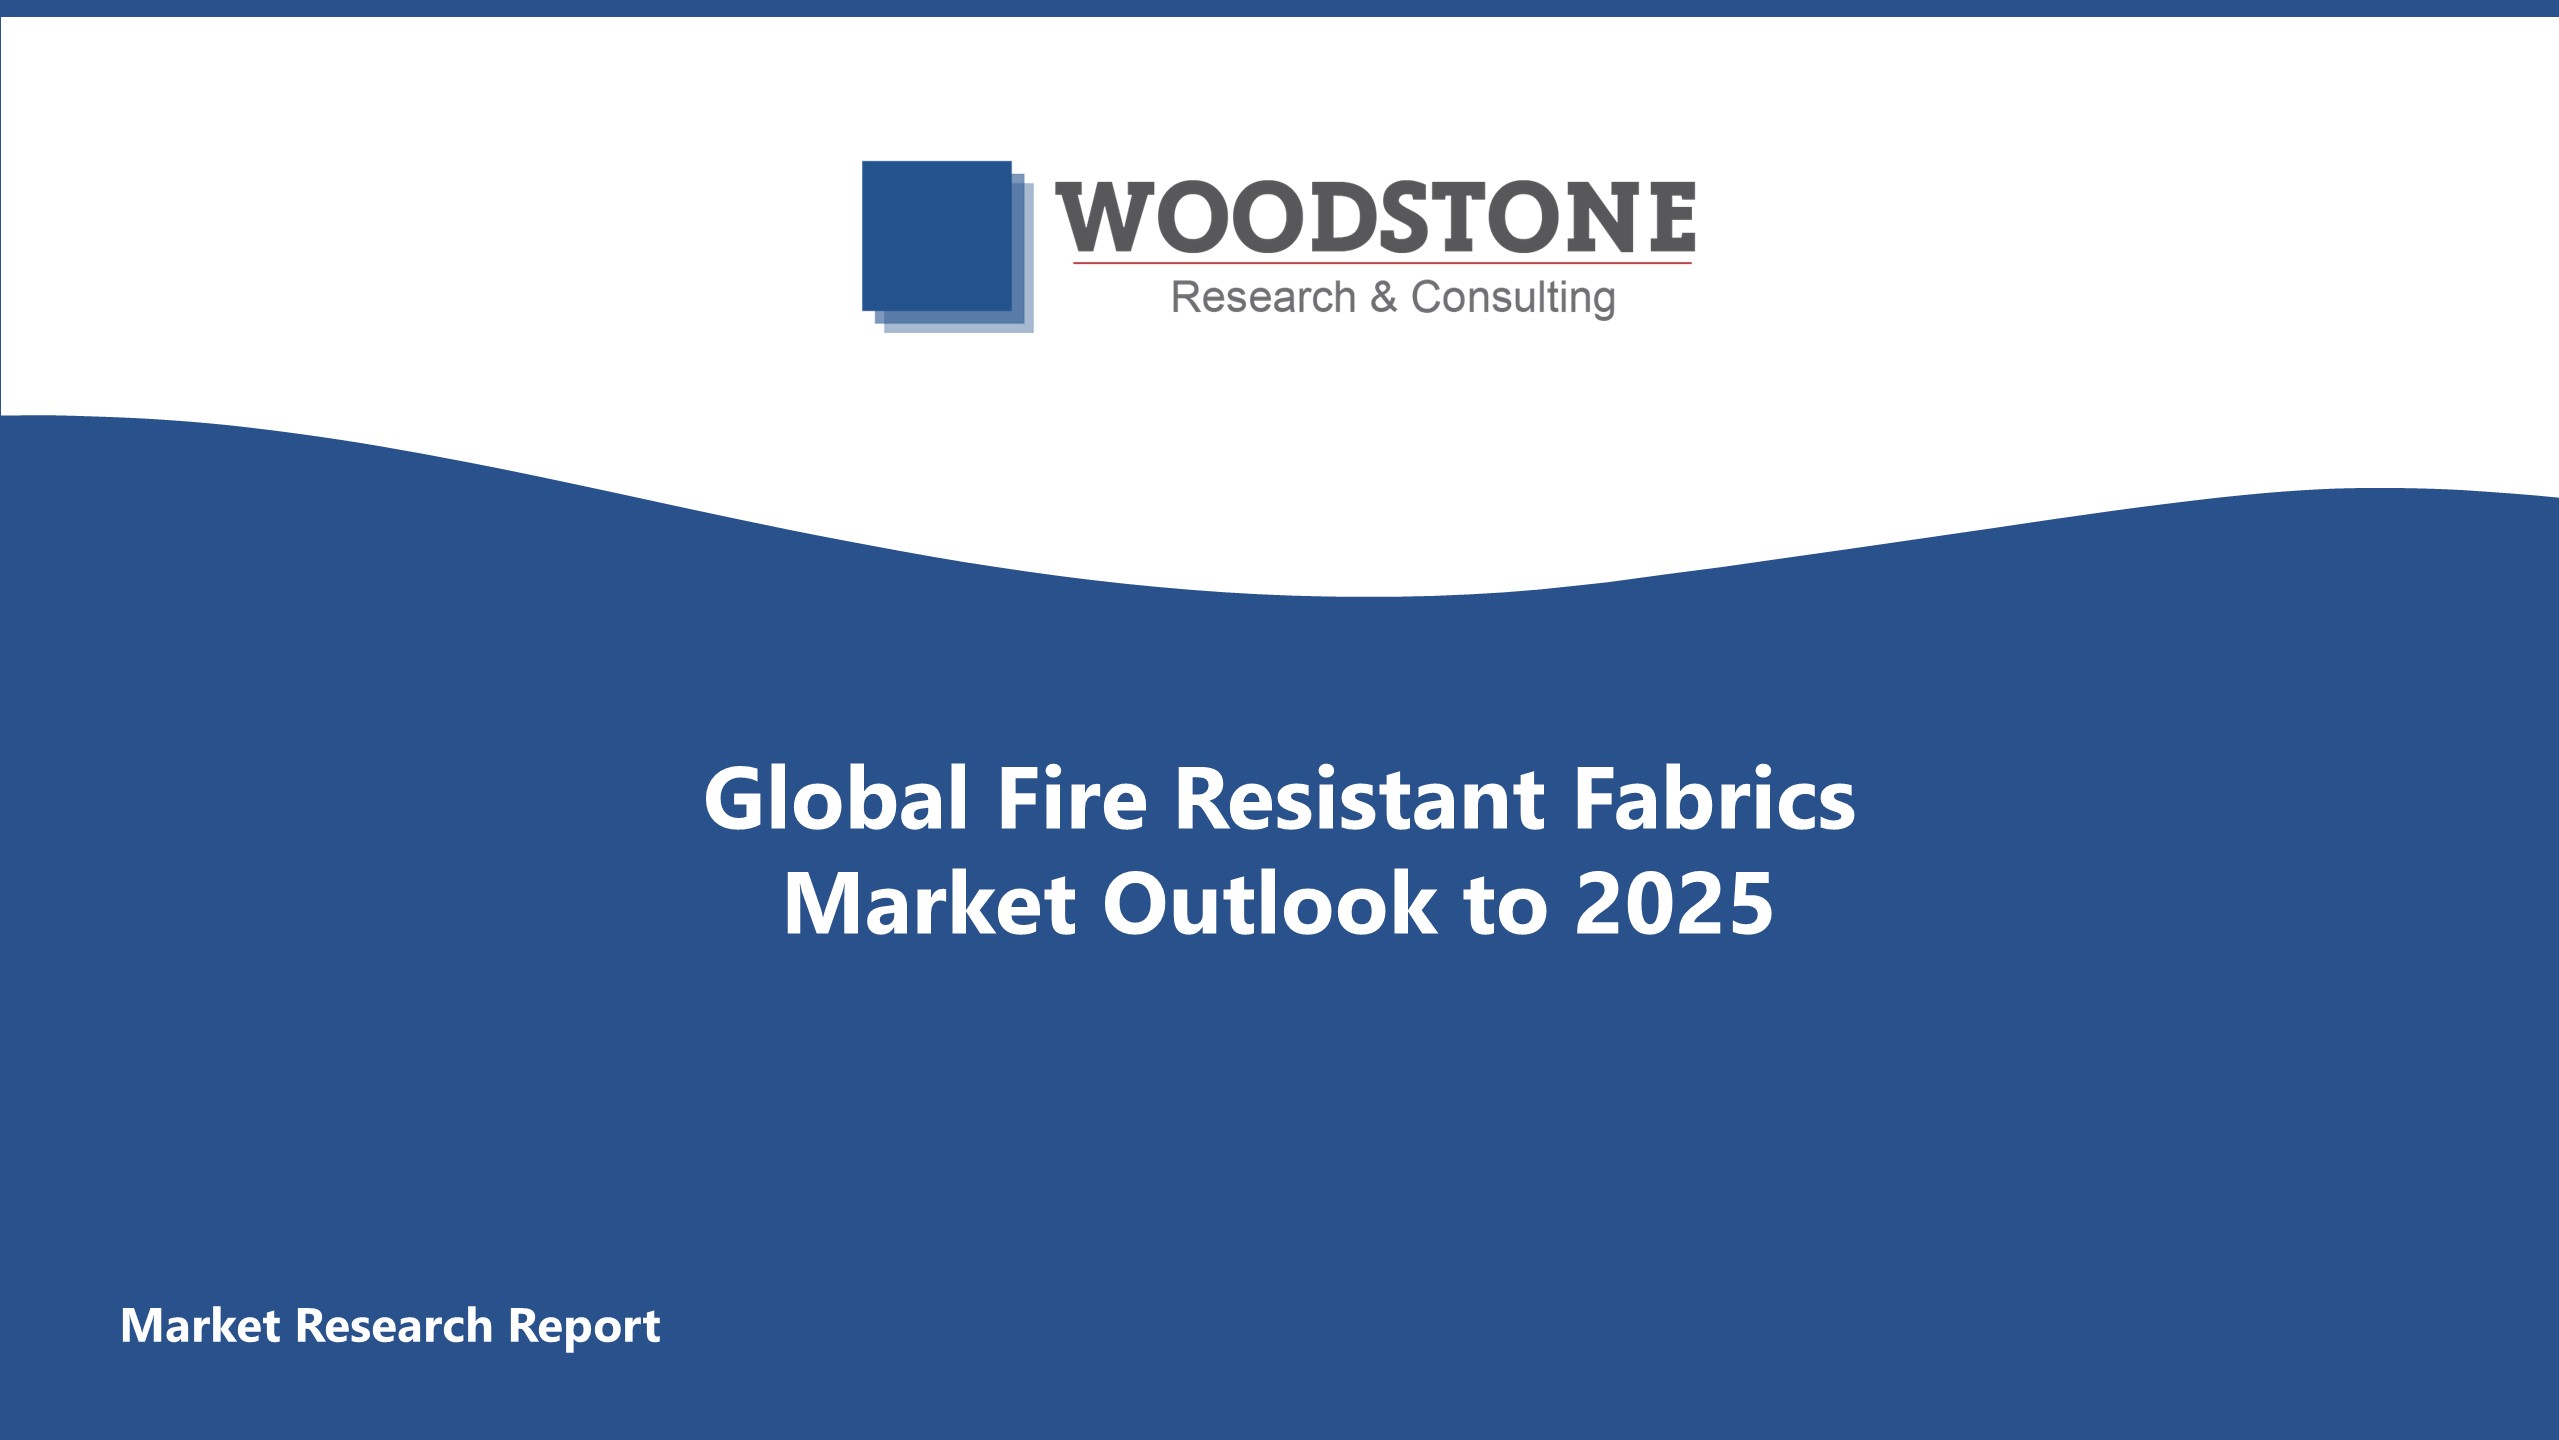 Global Fire Resistant Fabrics Market Outlook to 2025